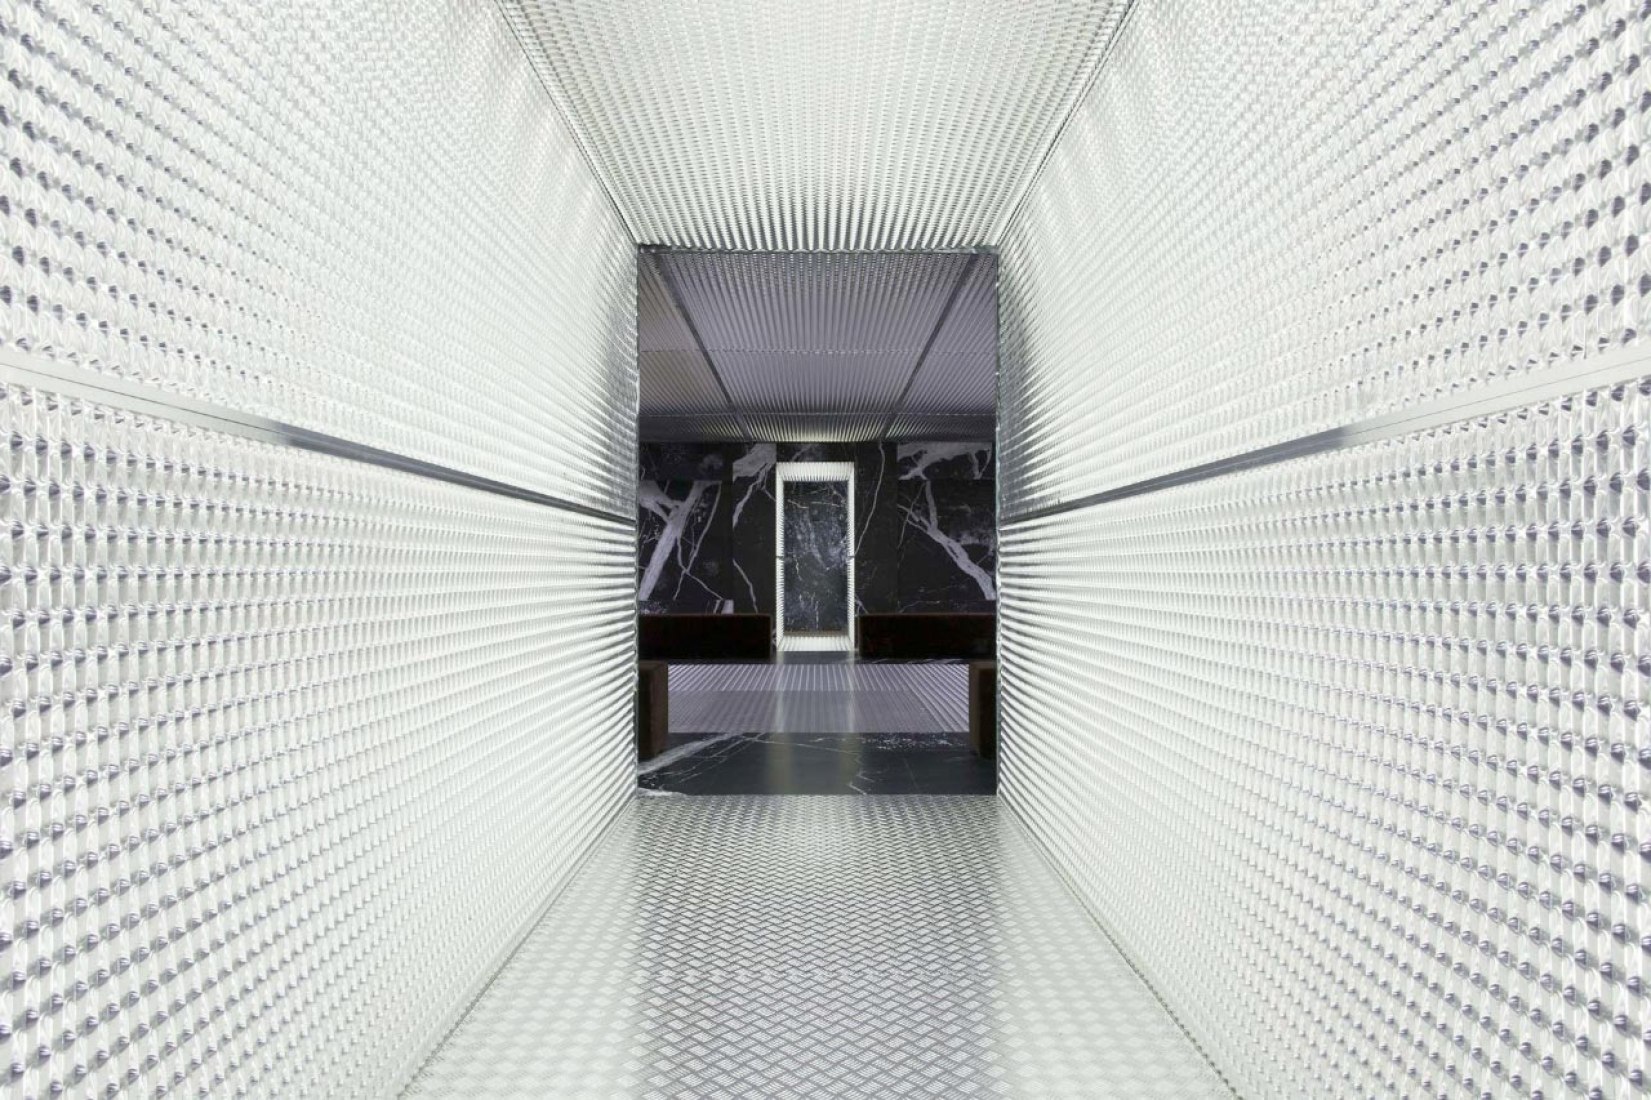 Prada's The Infinite Palace by OMA | The Strength of Architecture ...